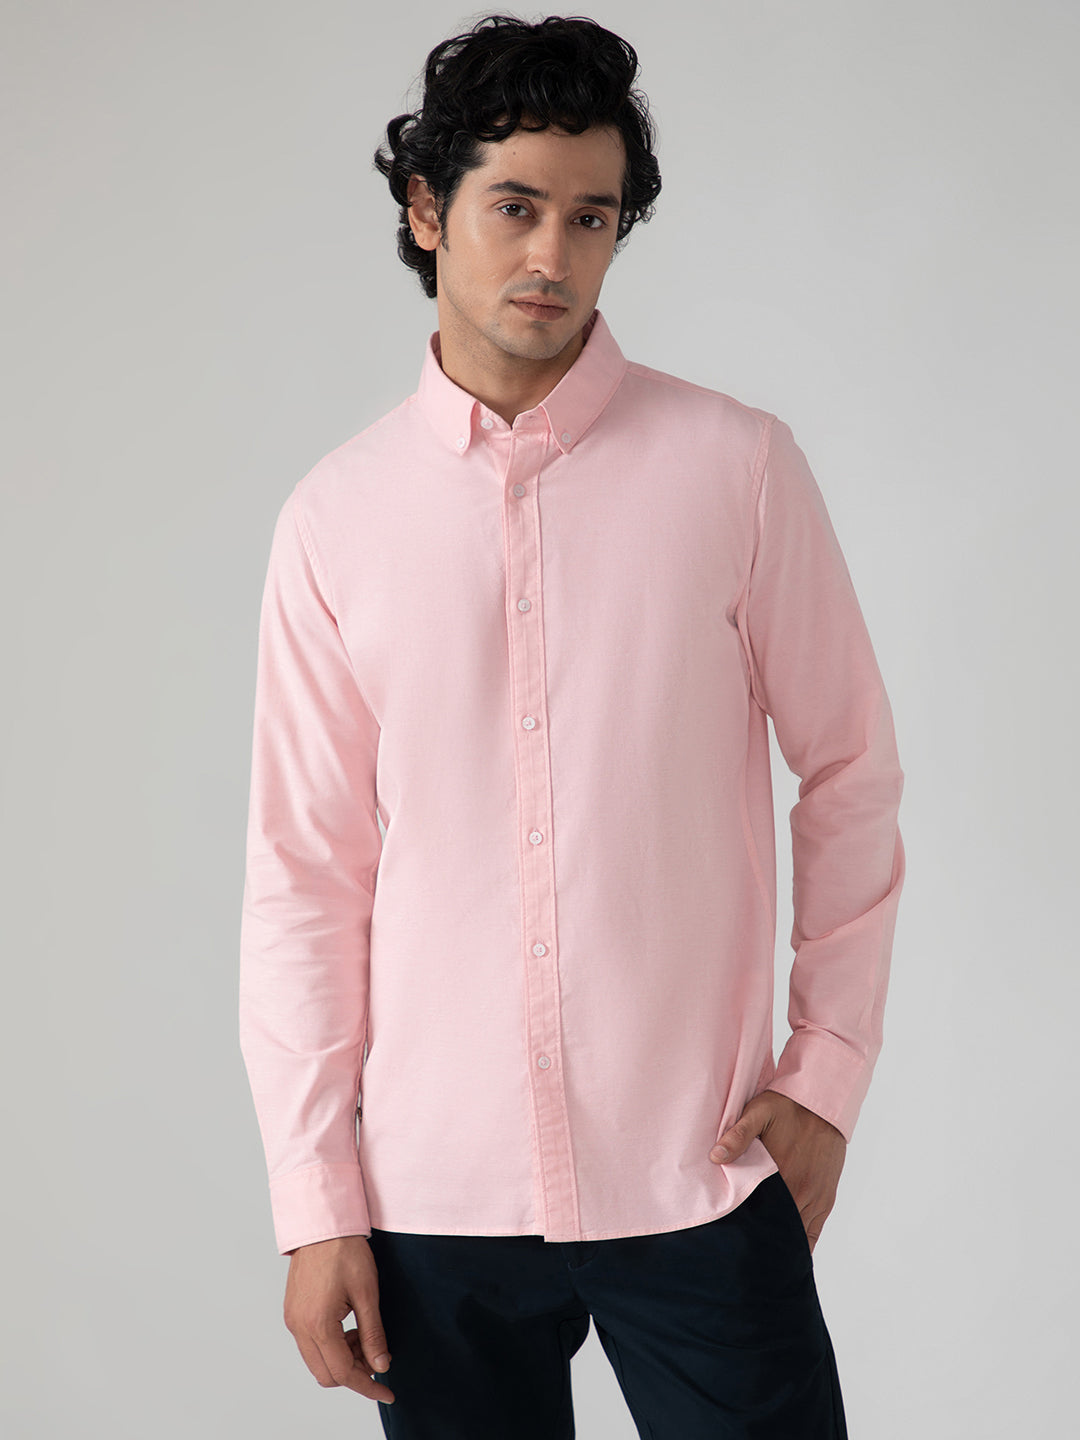 Yarn Dyed Oxford Shirt in Salmon Pink- Slim Fit